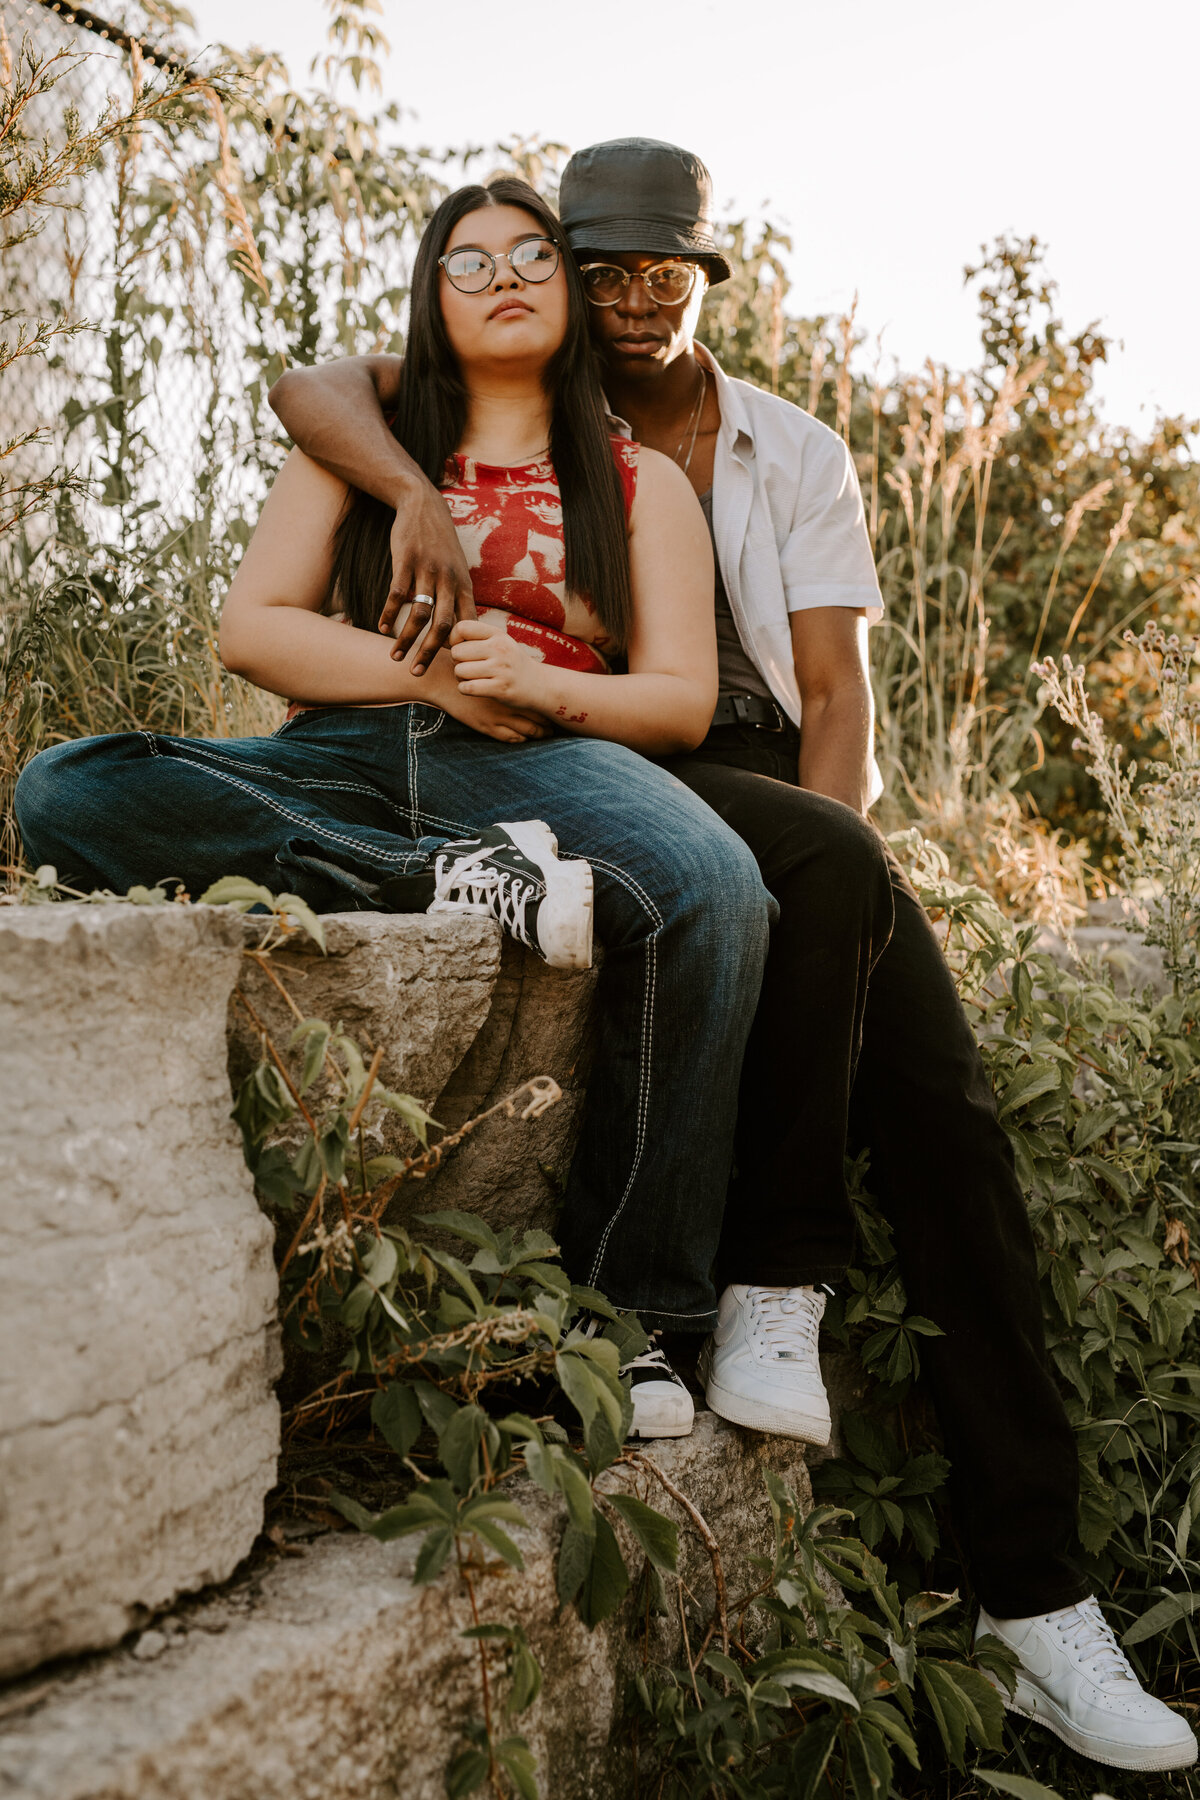 toronto-couples-session-queen-west-99-sudbury-summer-vibes-39